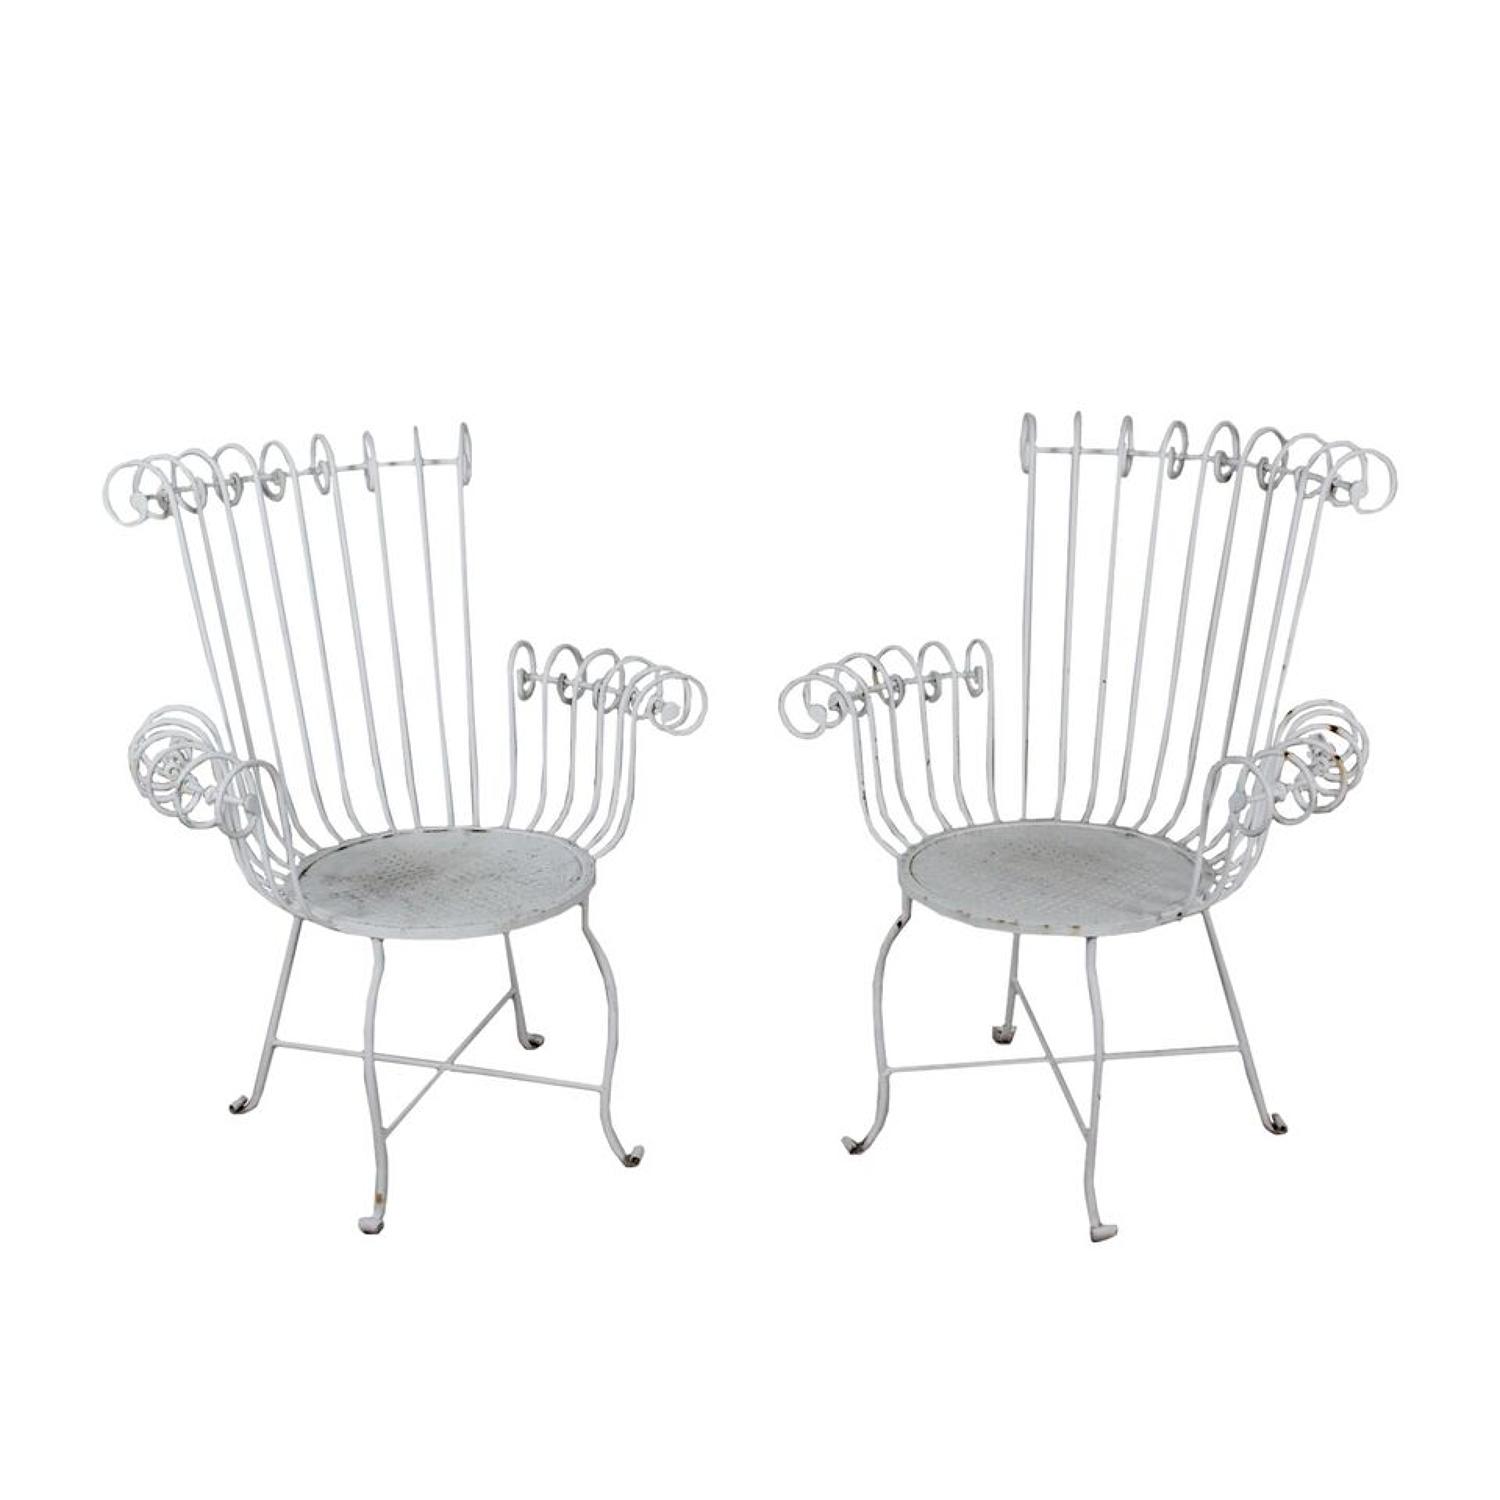 Pair of lacquered iron garden chairs